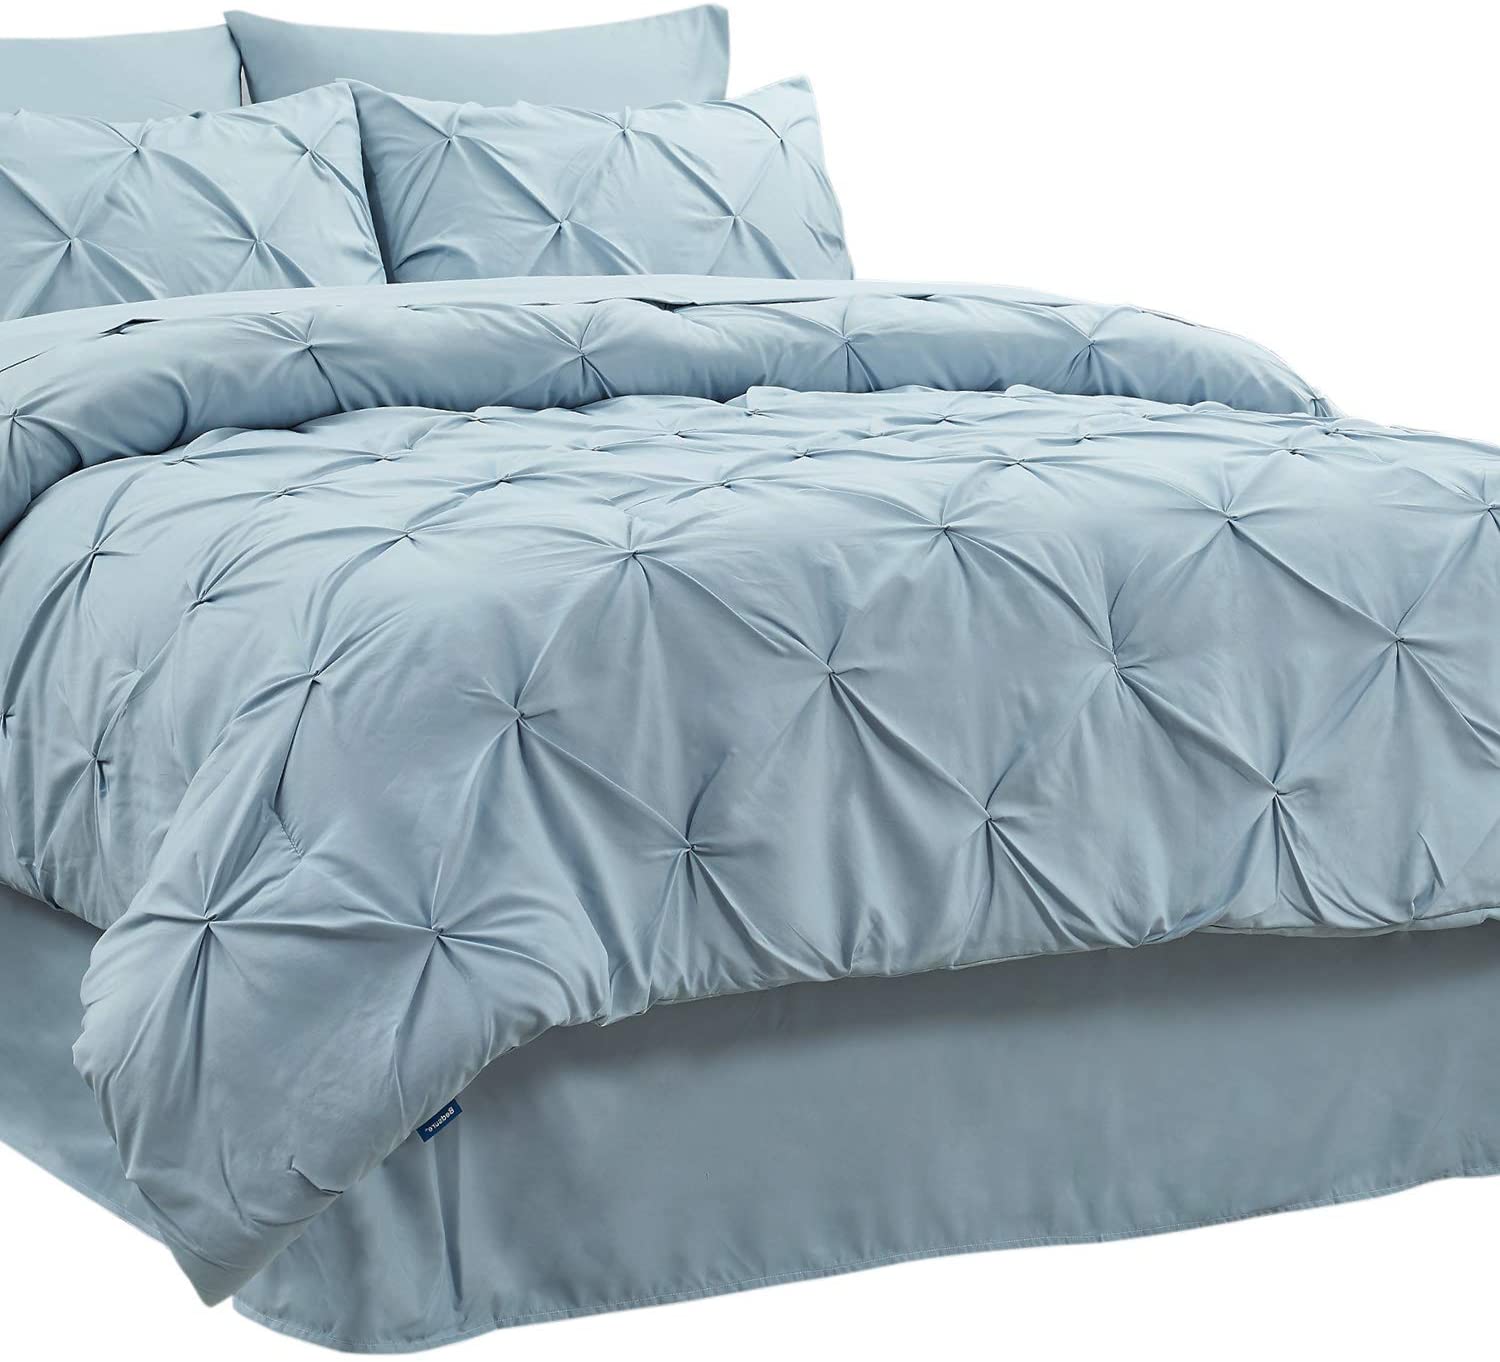 8 Pieces Jacquard Bed in a Bag Bed Set with Comfort Details about   Bedsure Queen Comforter Set 